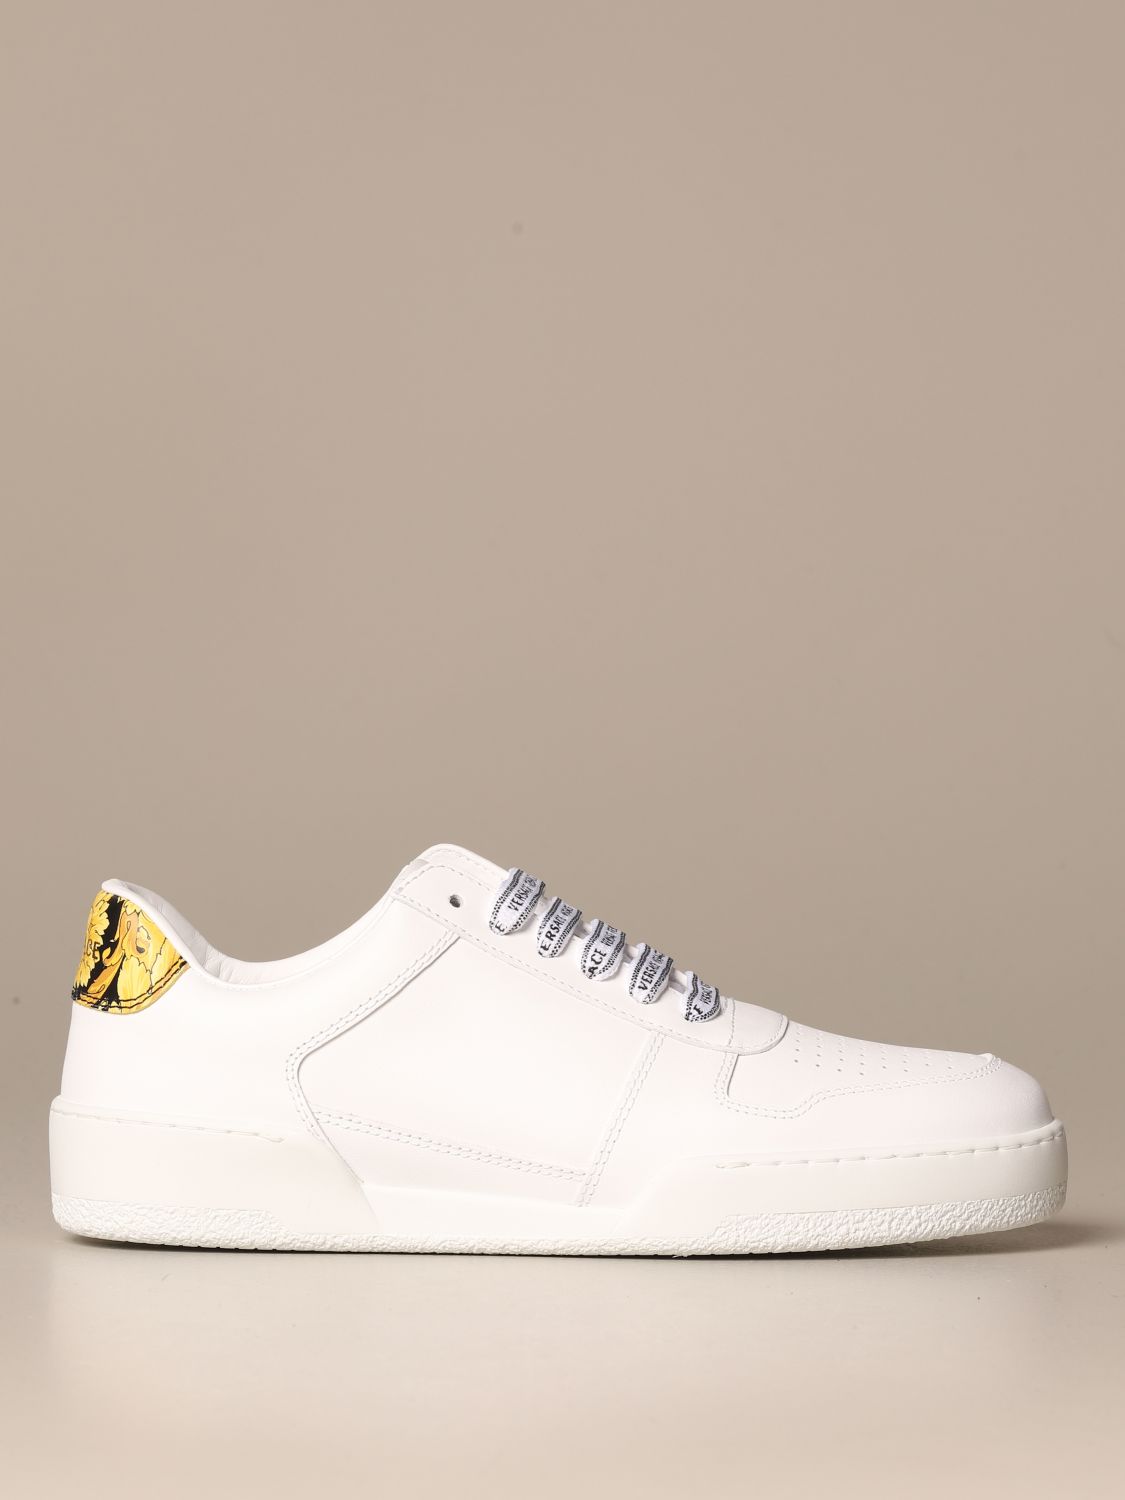 versace white shoes